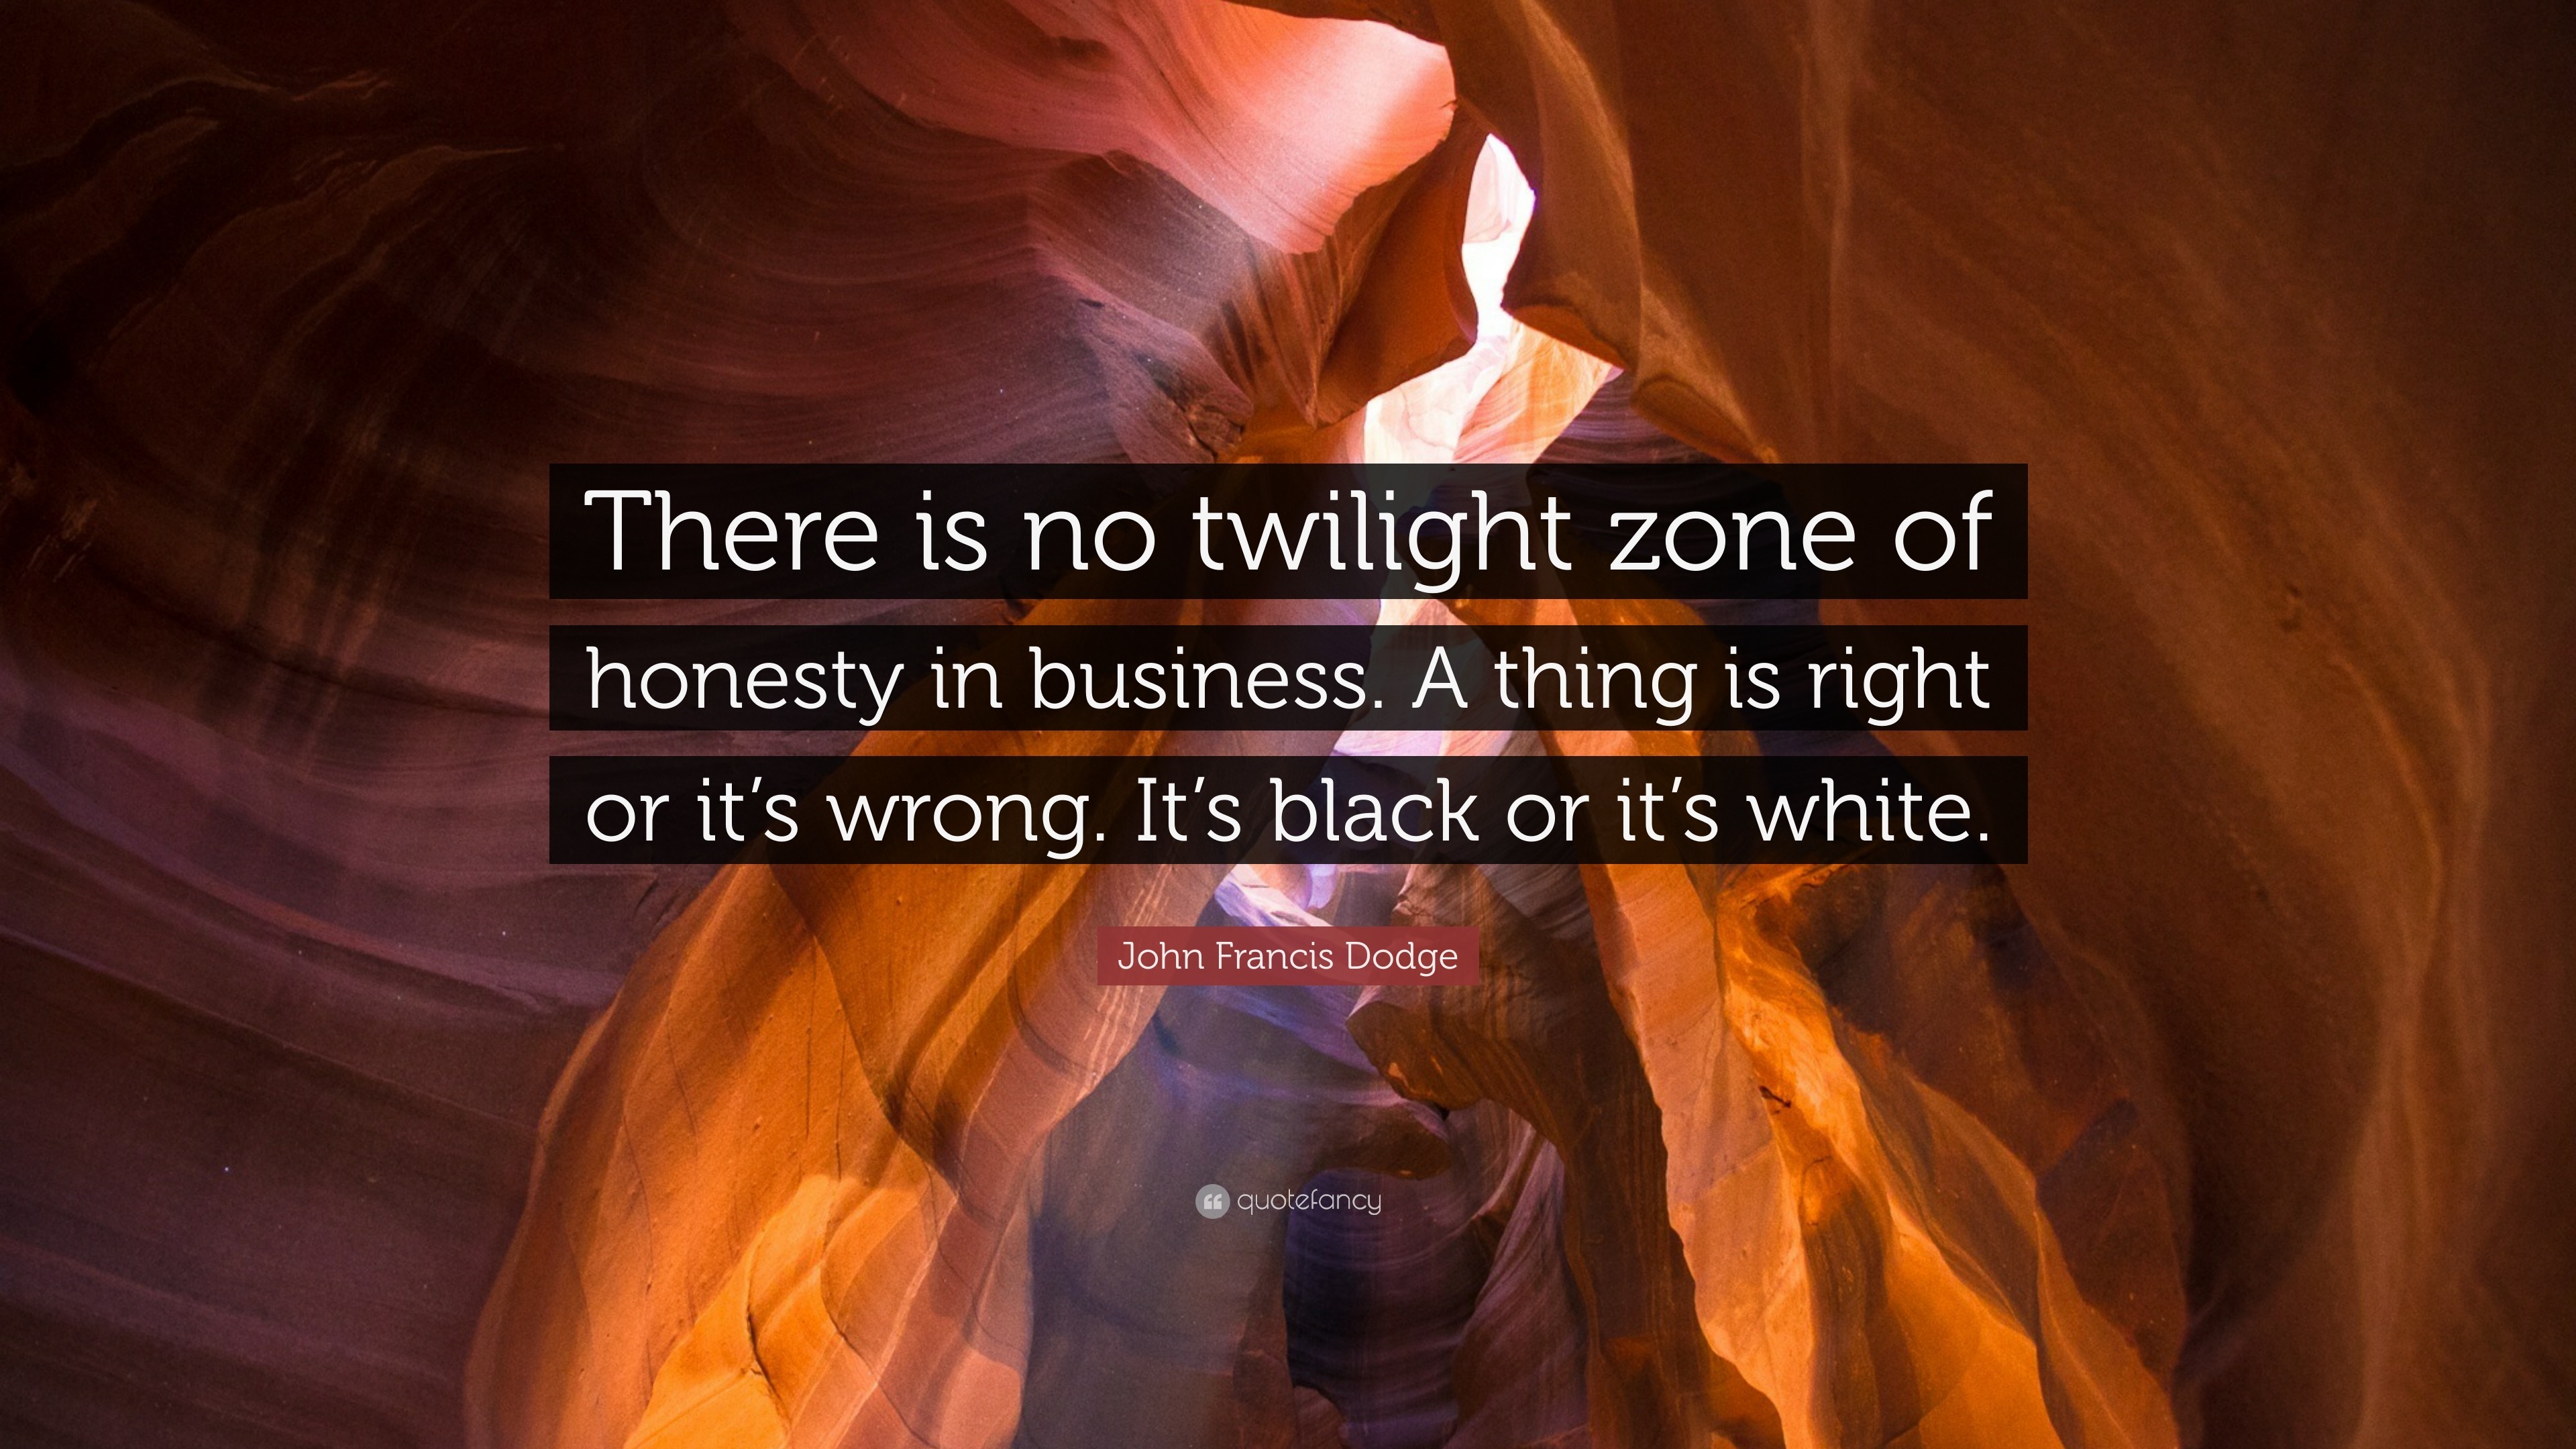 3840x2160 John Francis Dodge Quote: “There is no twilight zone of honesty in business.